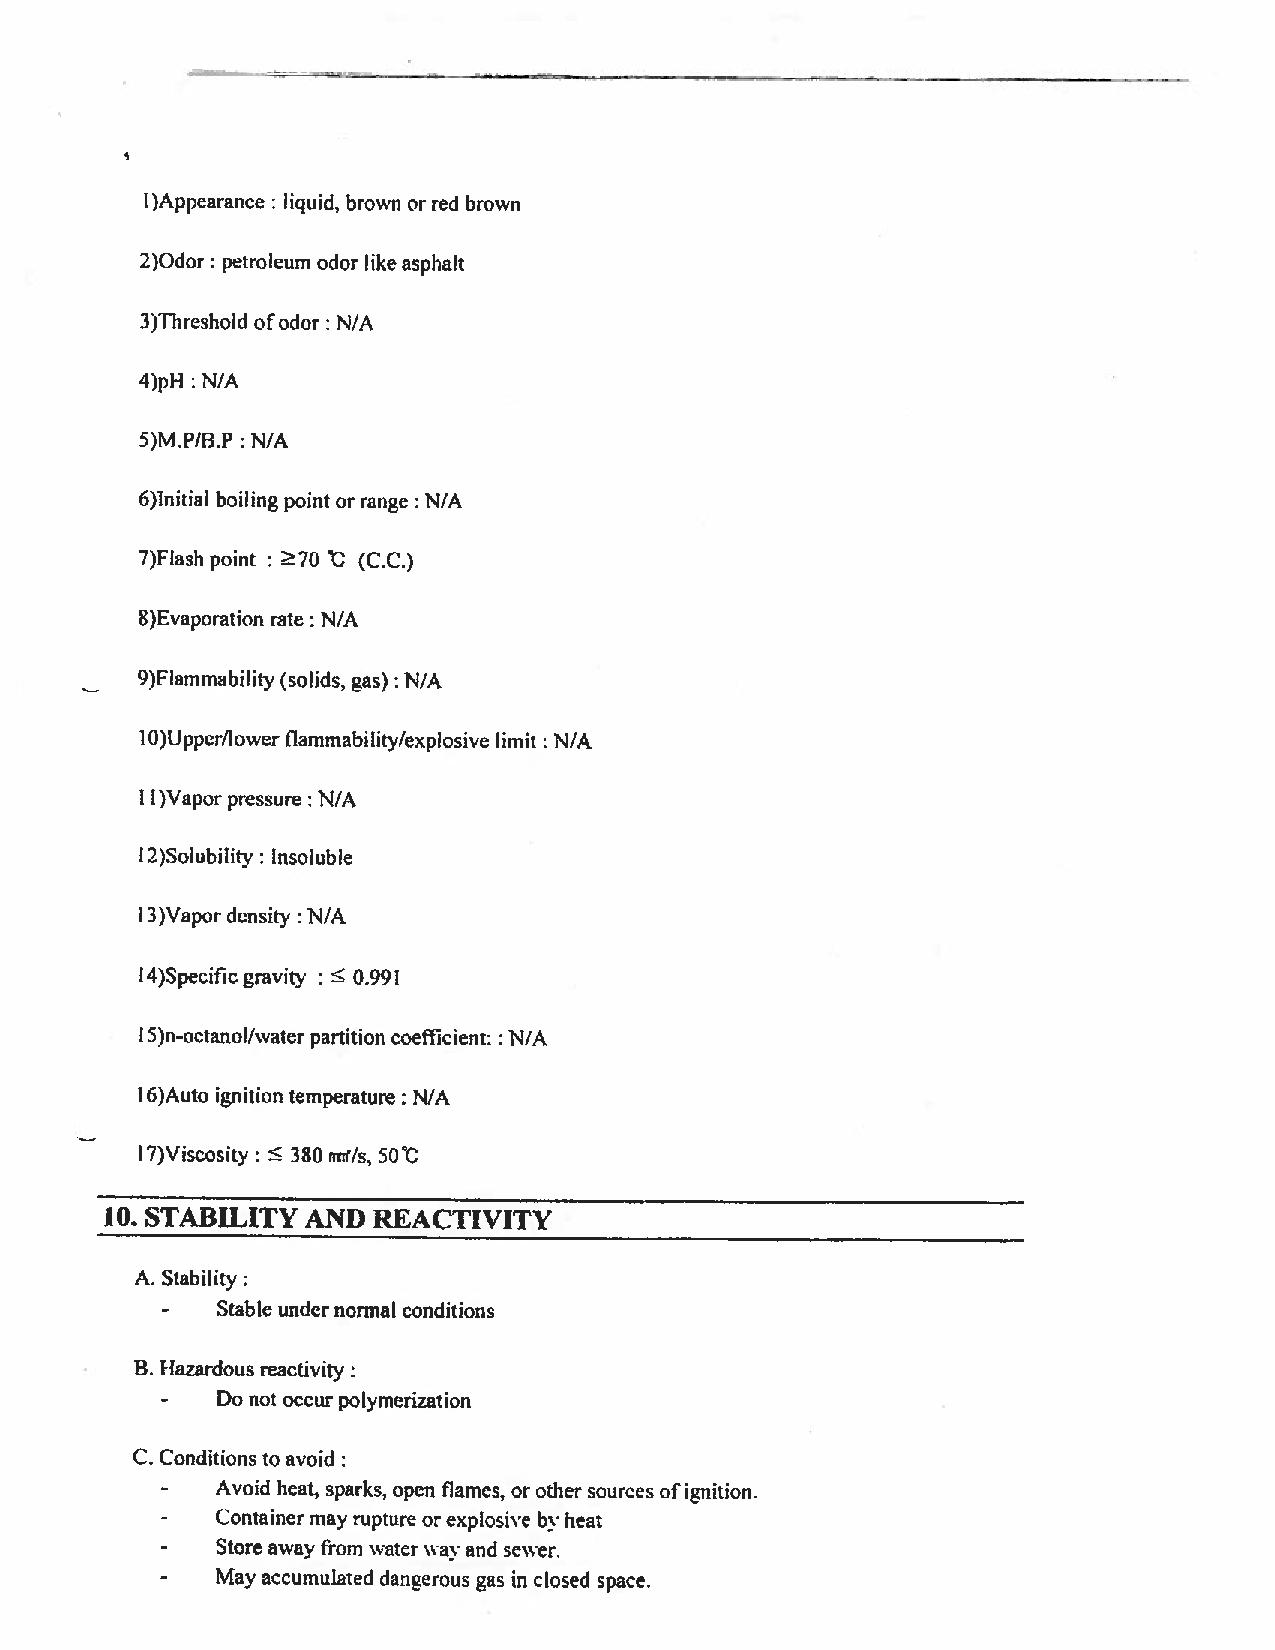 Scan of the 7th page of the M/V Marathassa’s Material Safety Data Sheet 